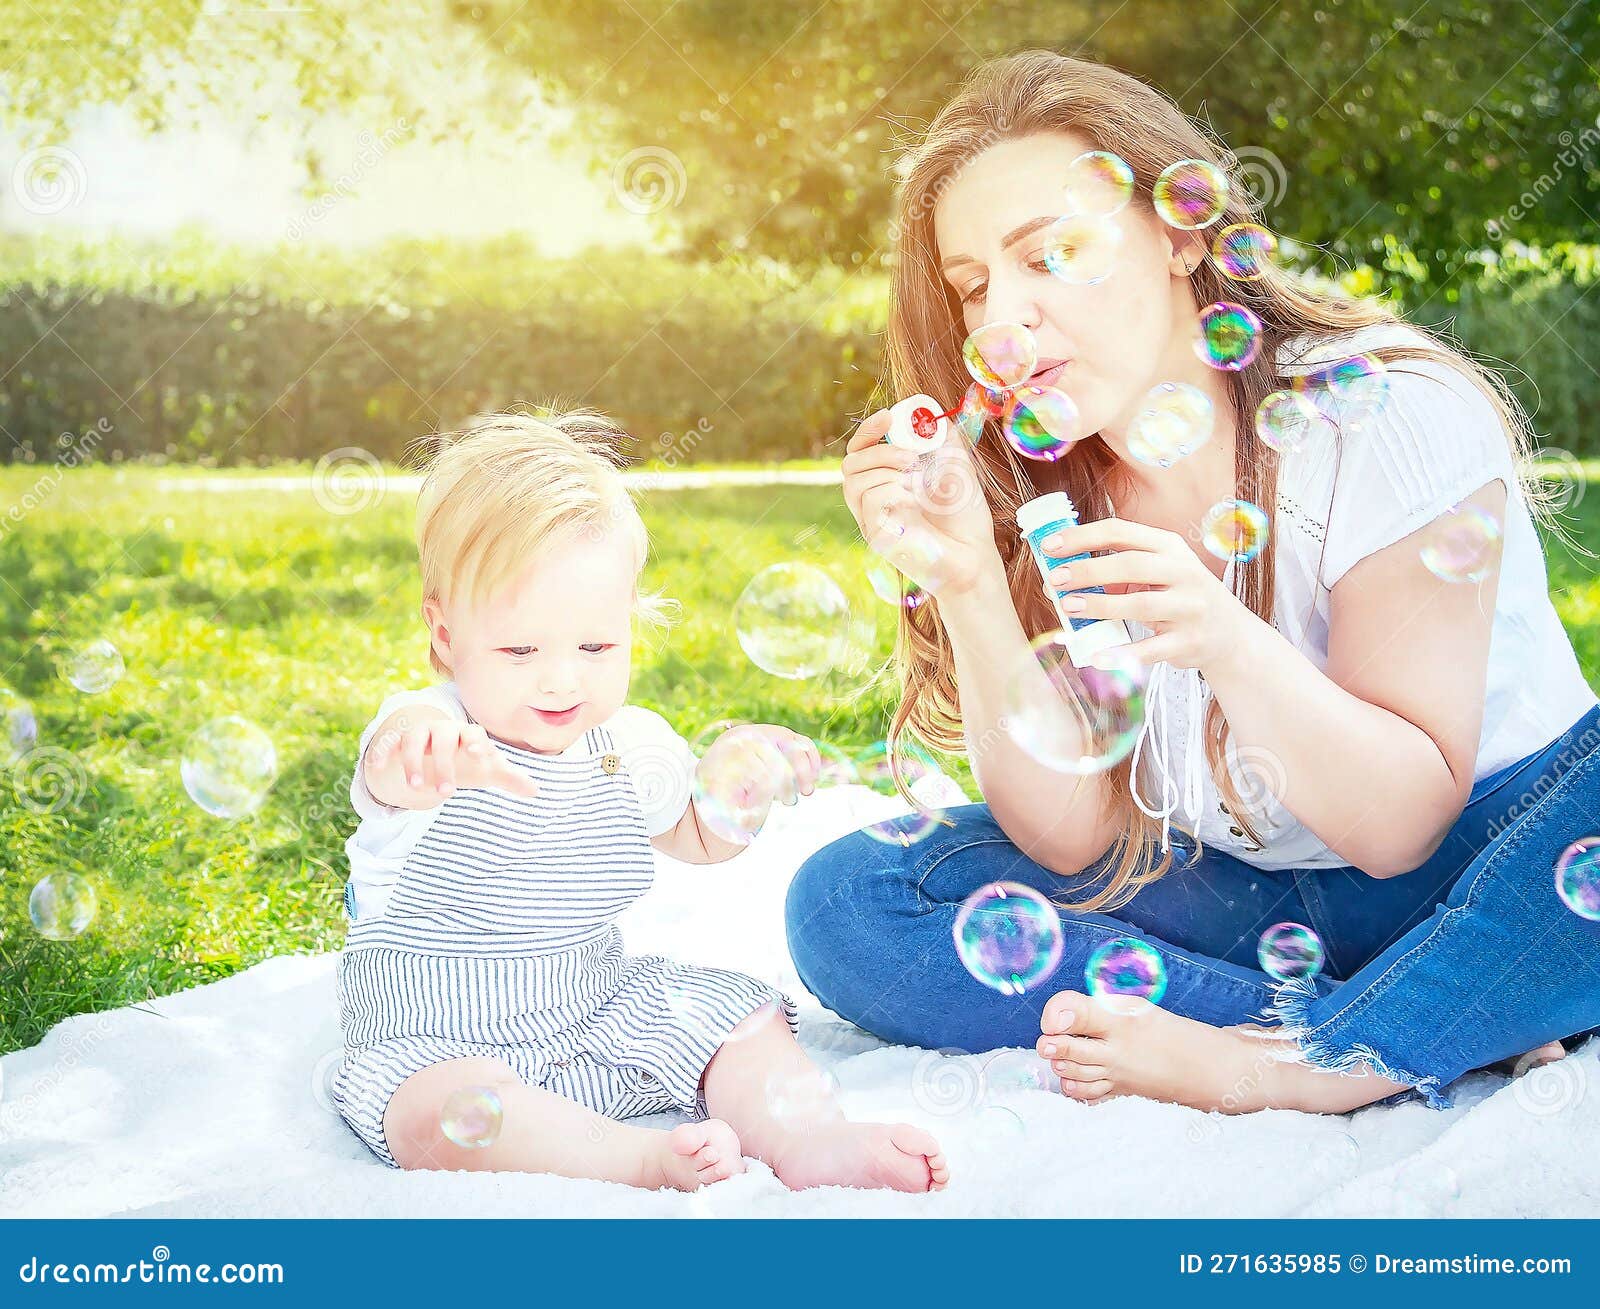 child (kid) having fun with mother and soap bubbles in a sunny summer day. caucasians happy baby (boy).